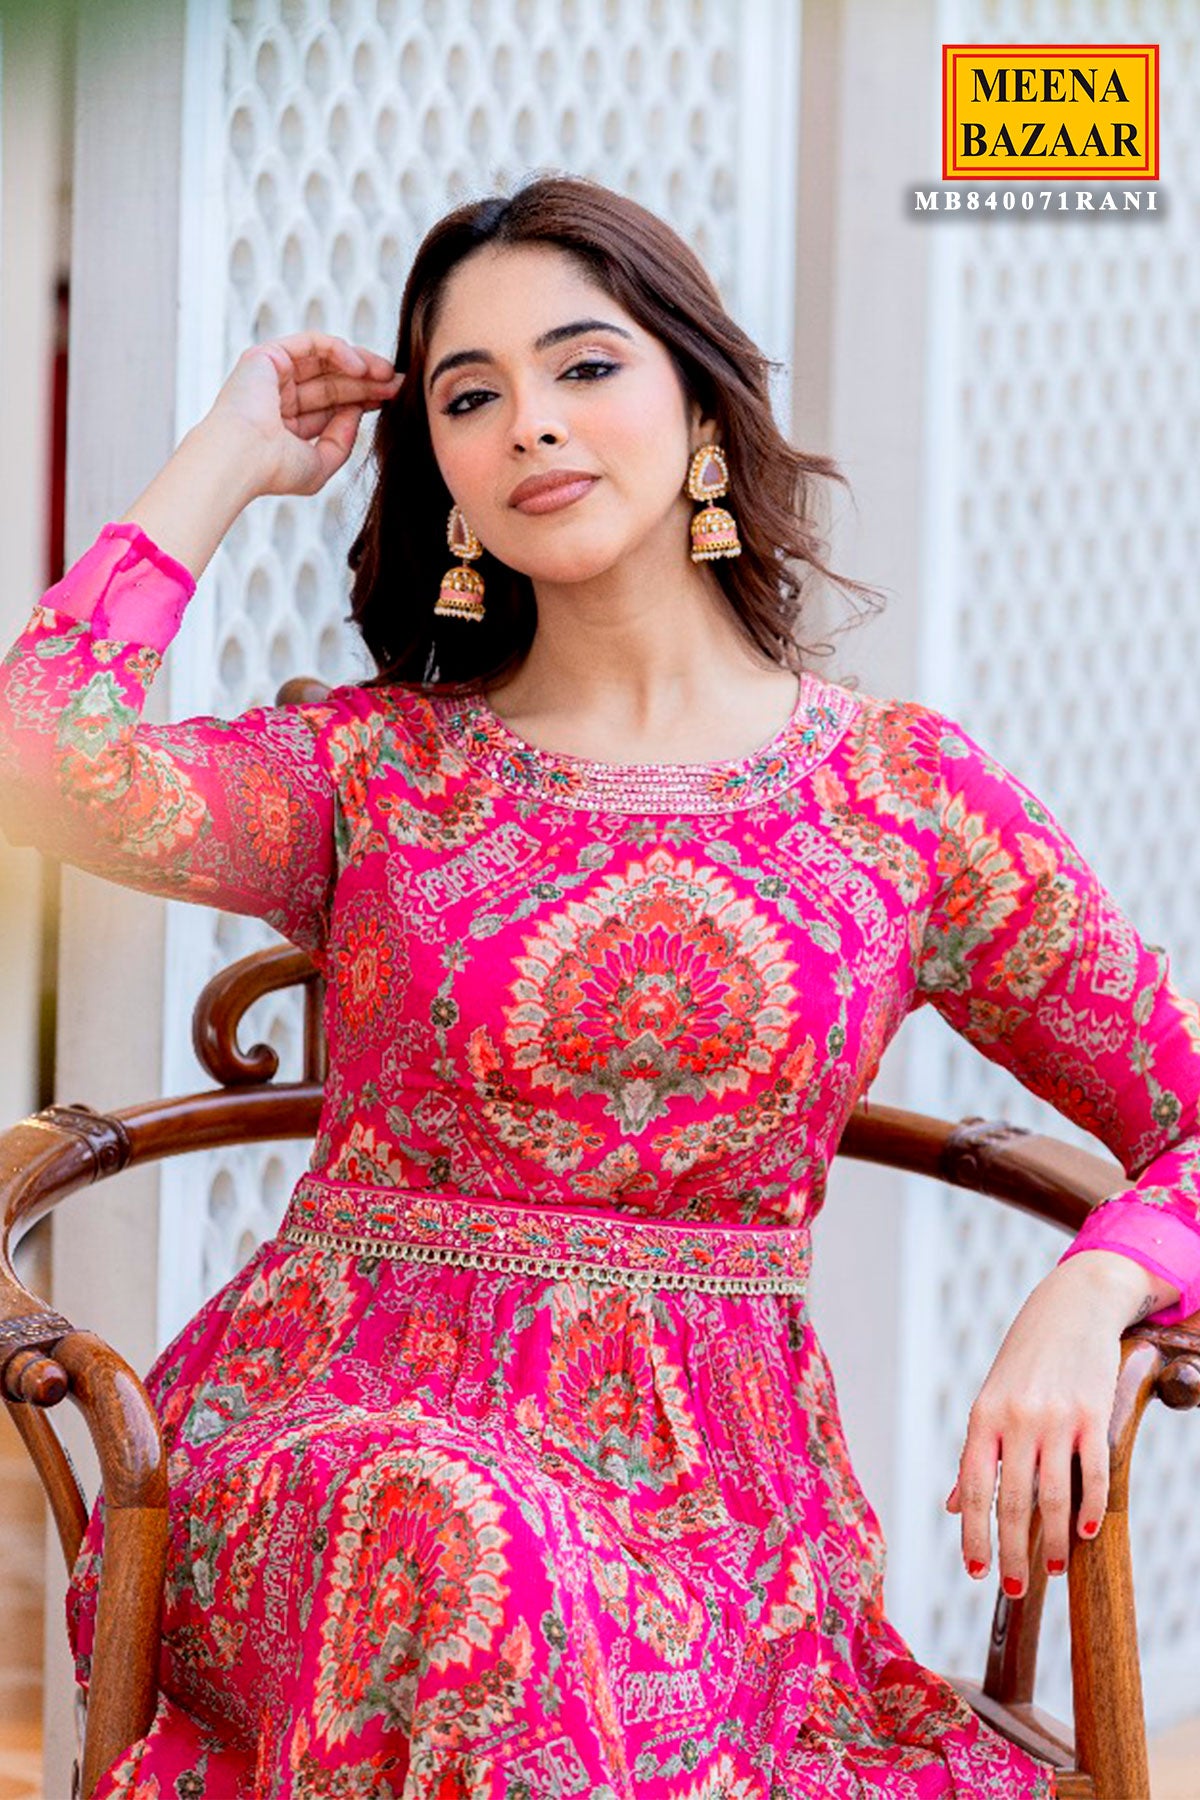 Rani Chinon Cutdana and Sequin Embroidery Kurti with Embroidered Belt